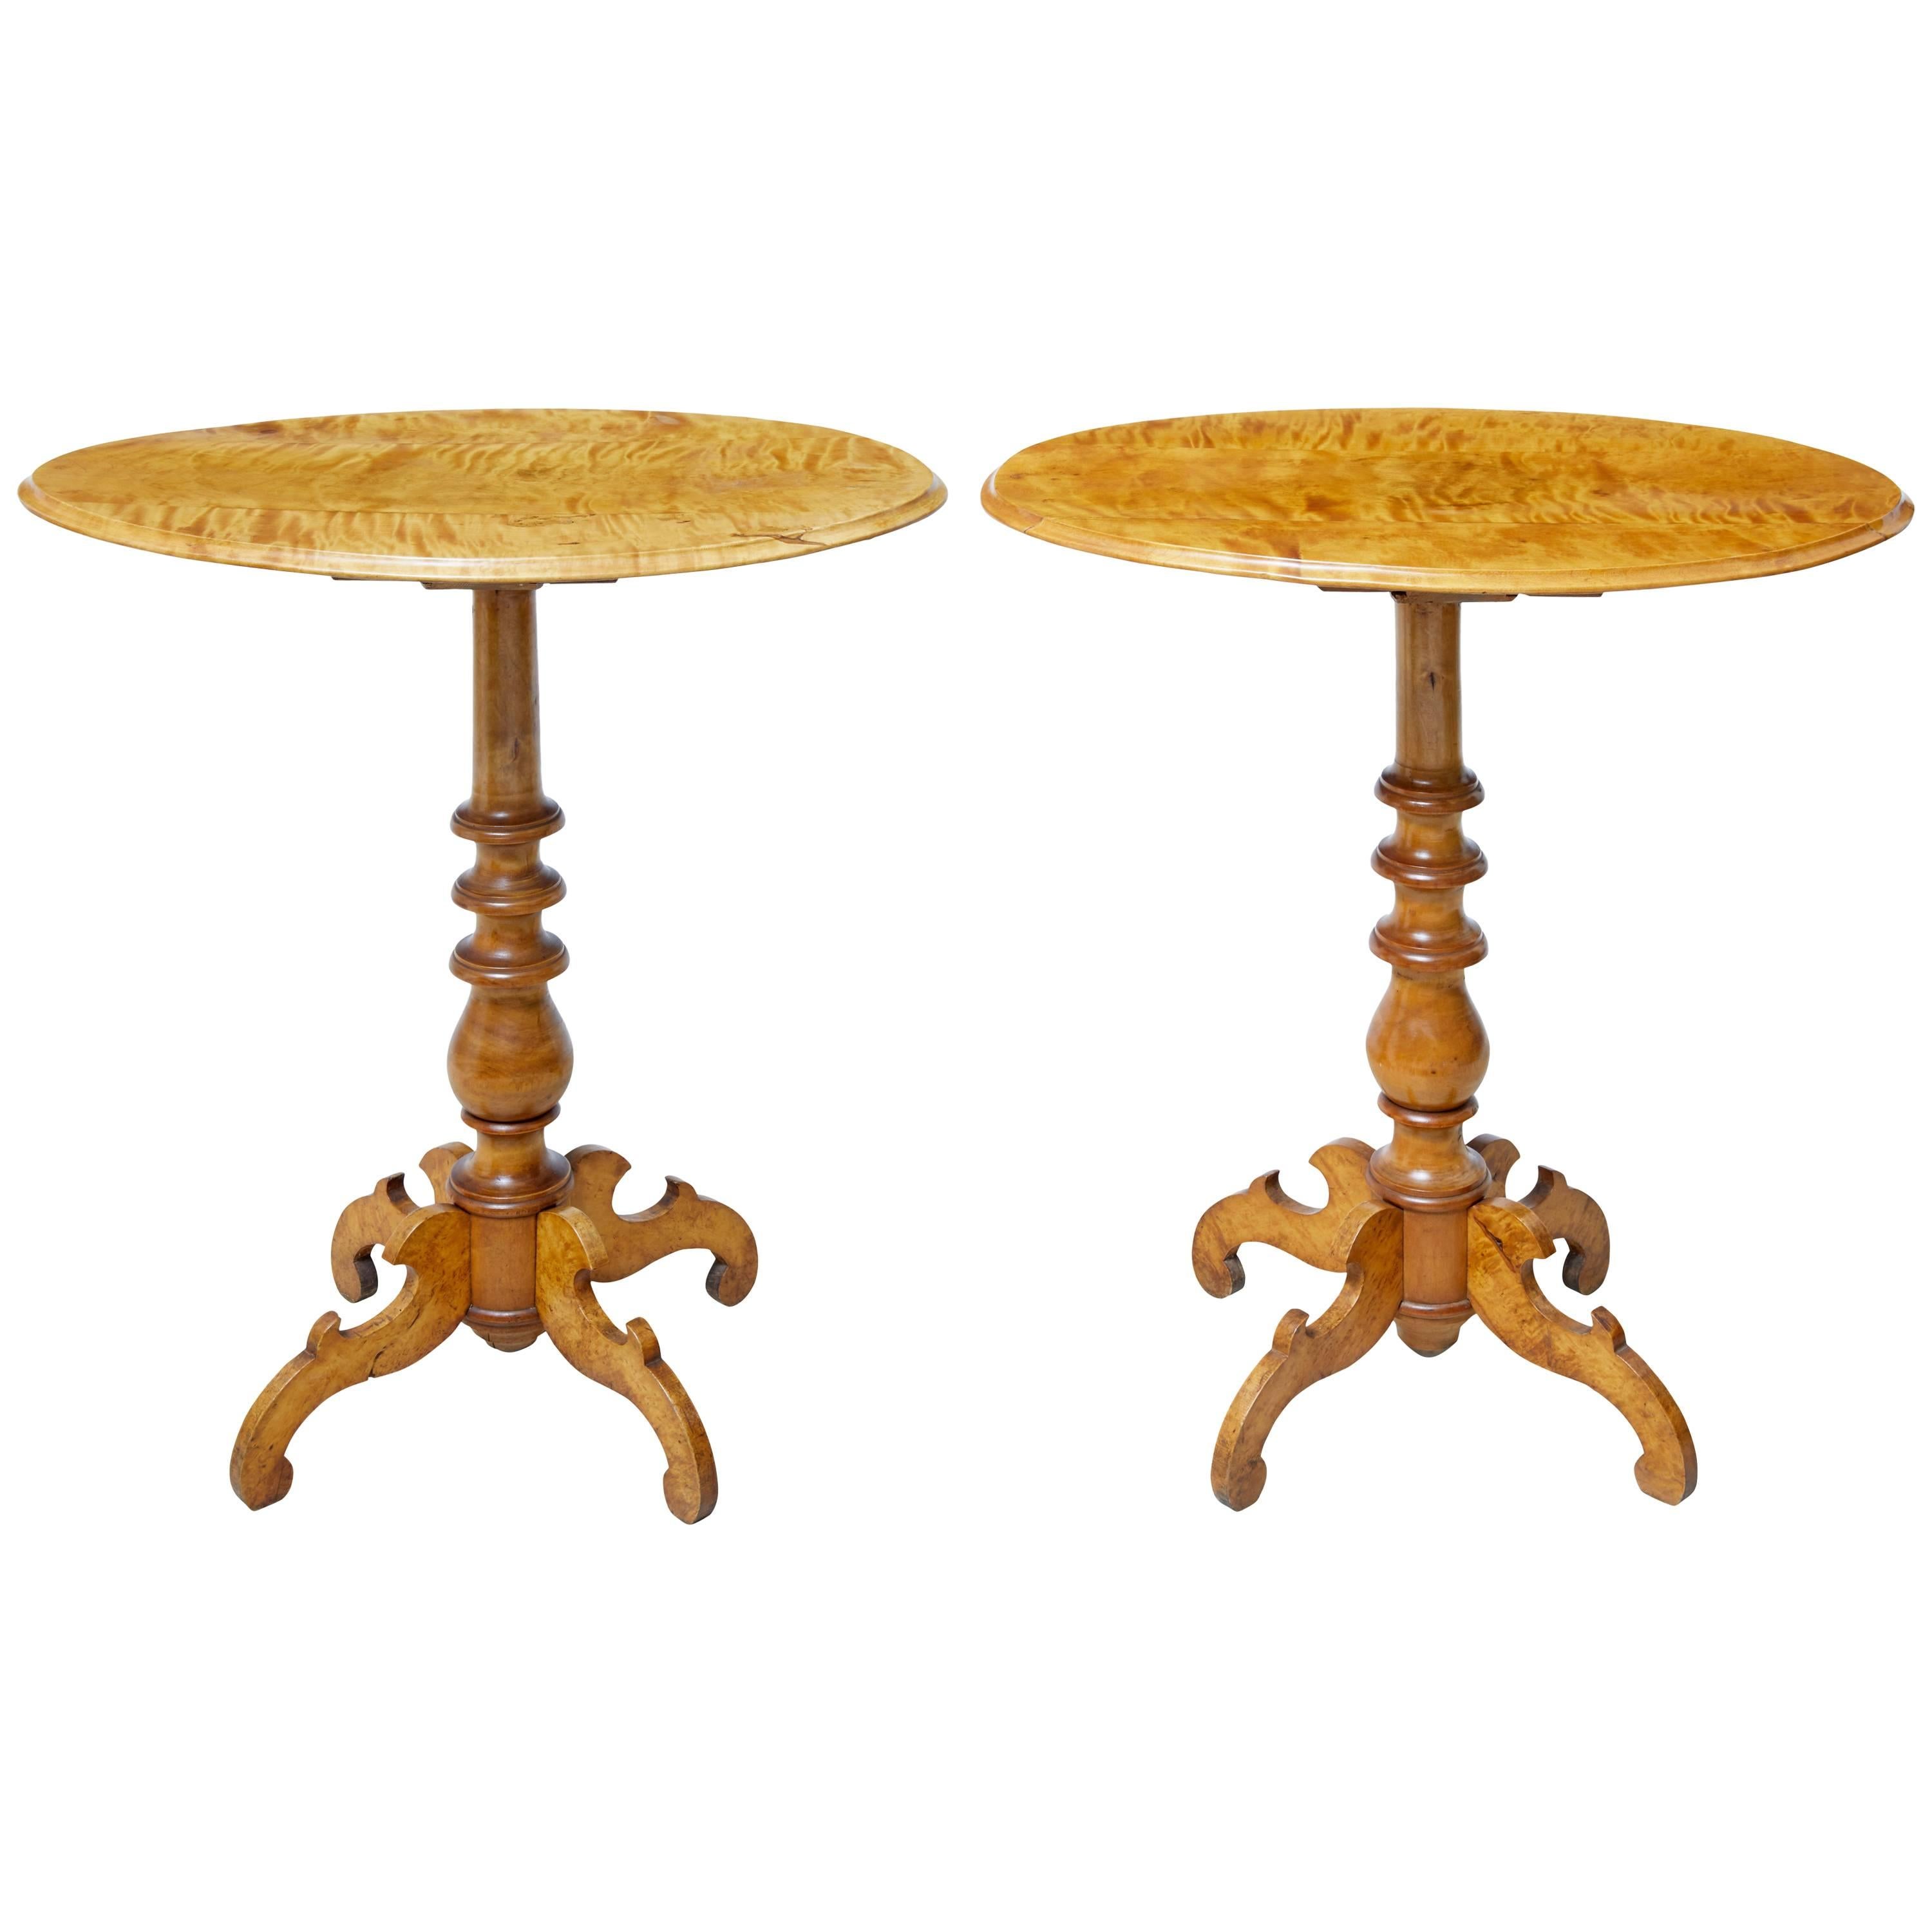 Late 19th Century Pair of Swedish Birch Occasional Tables